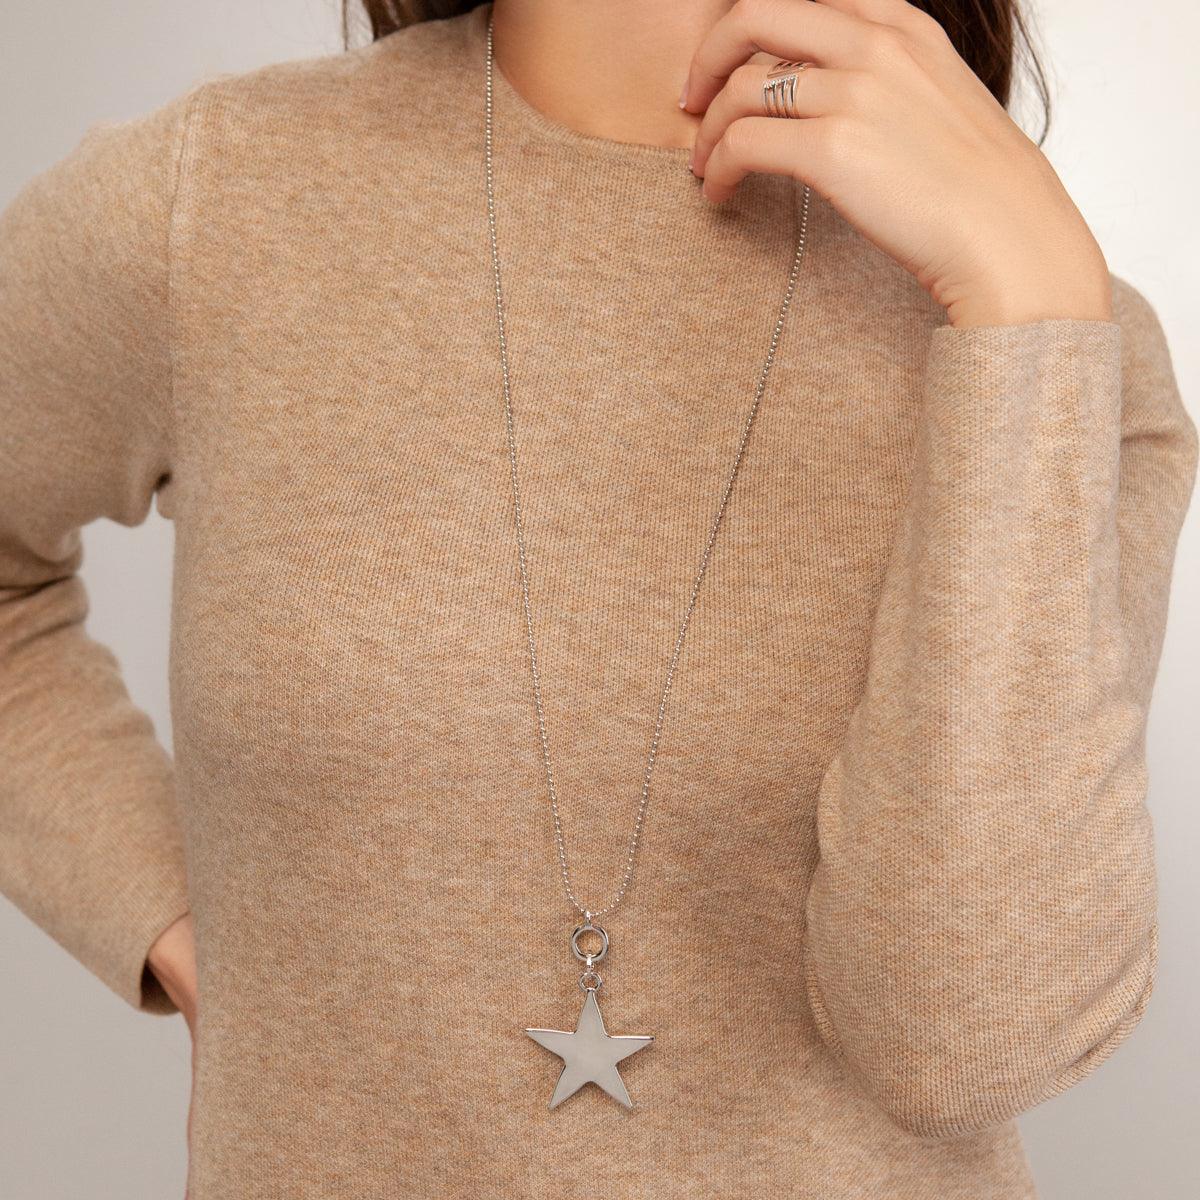 Model wearing Eternal Contemporary Star Pendant Necklace In Silver